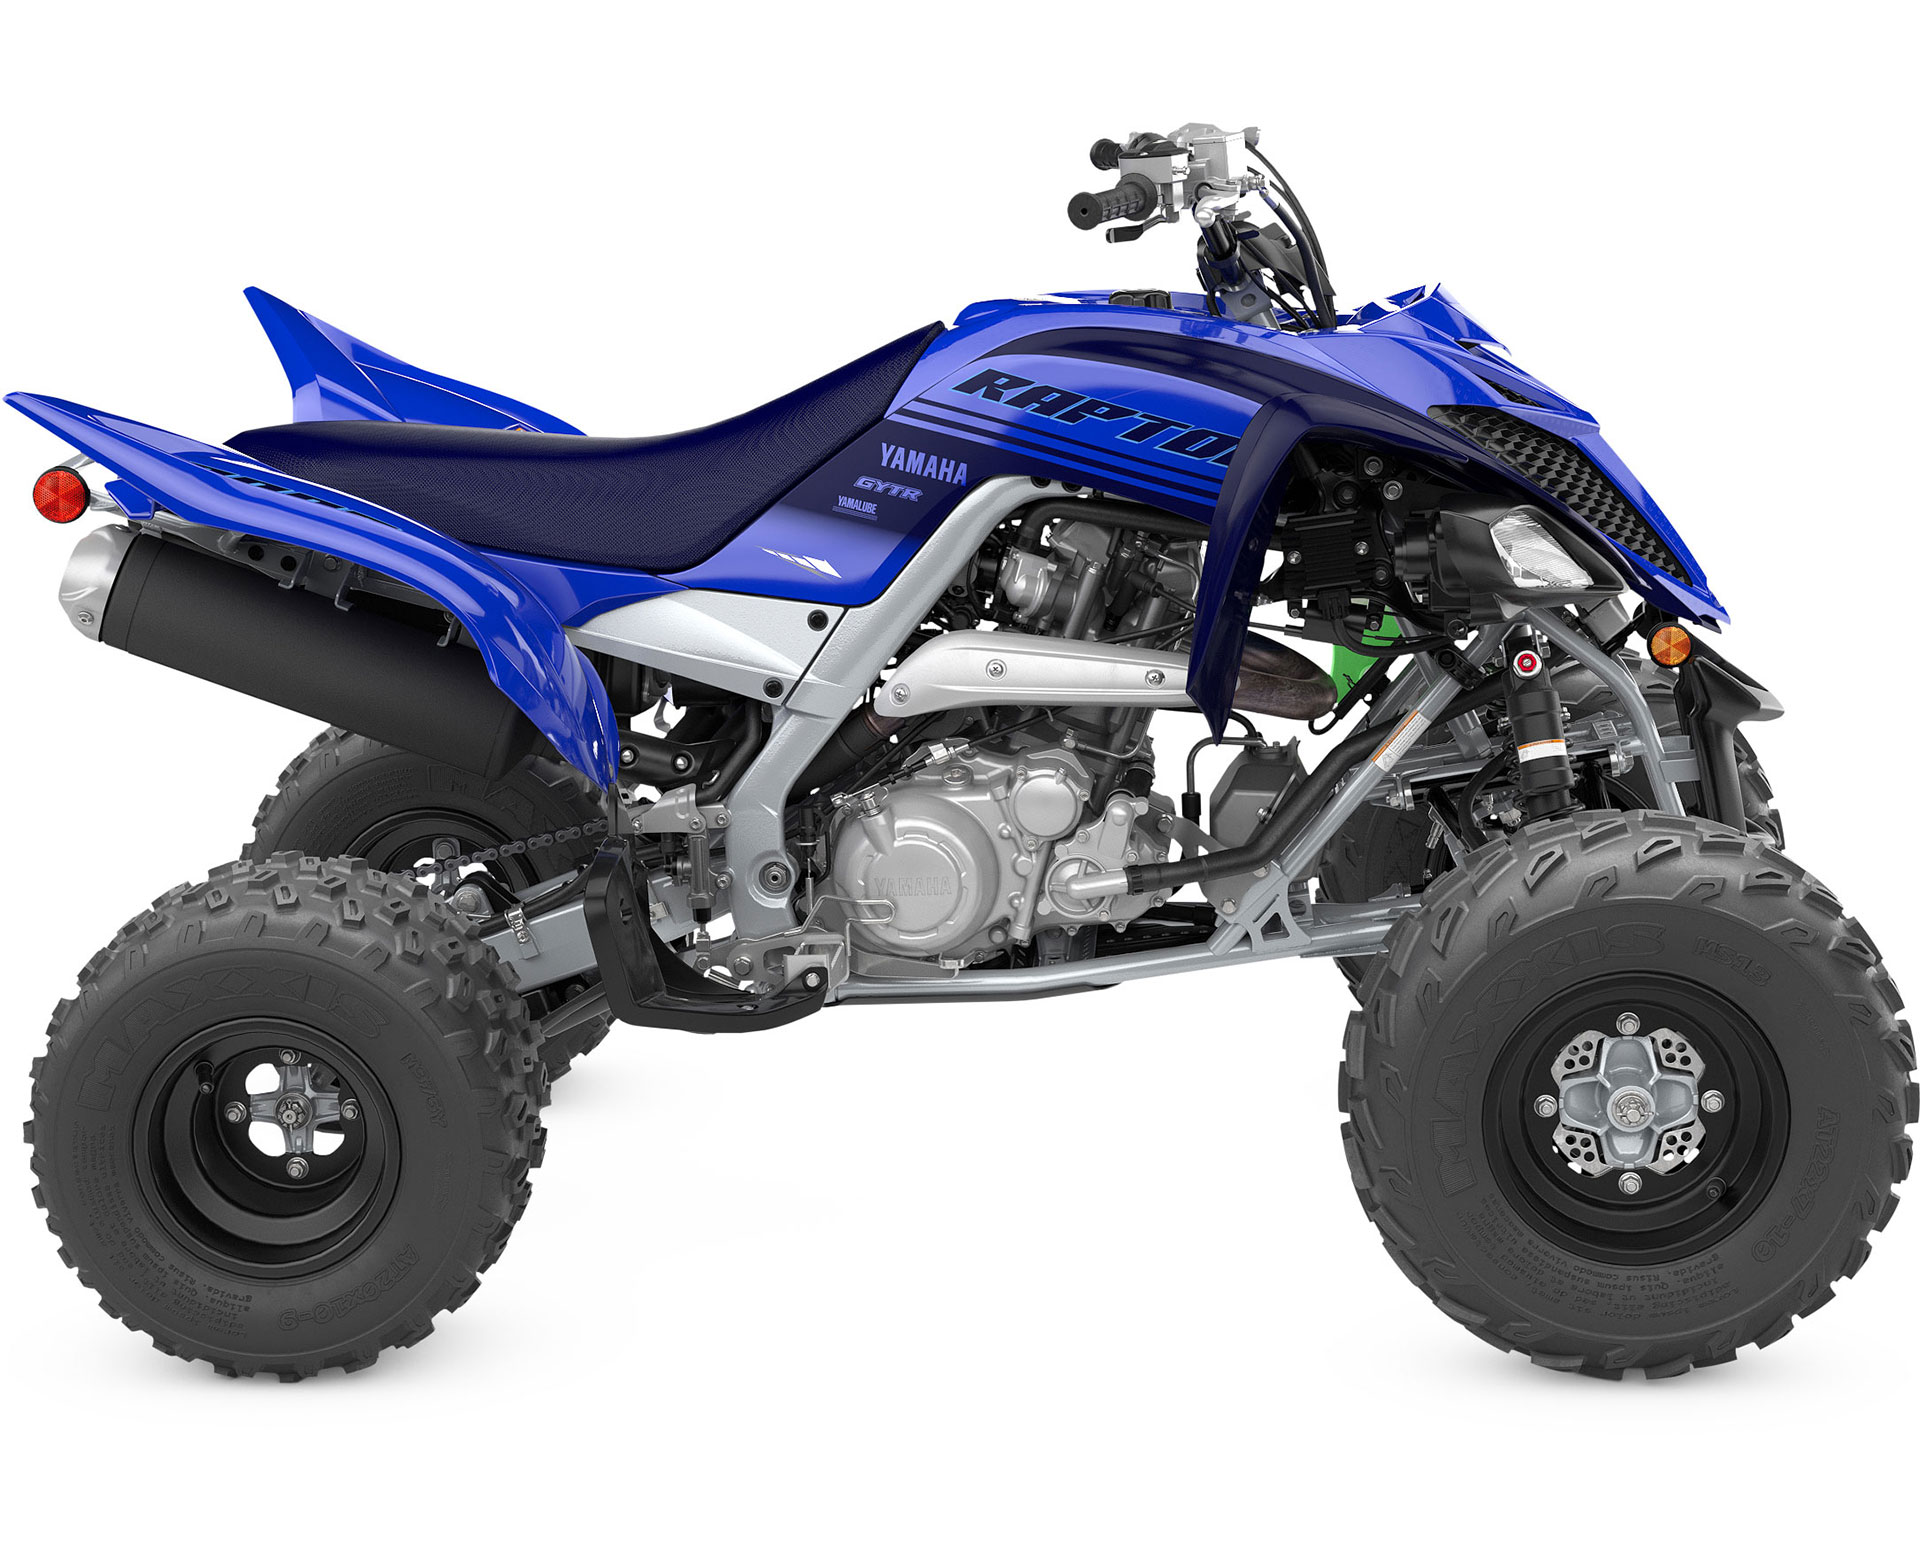 Thumbnail of your customized Raptor 700R 2024